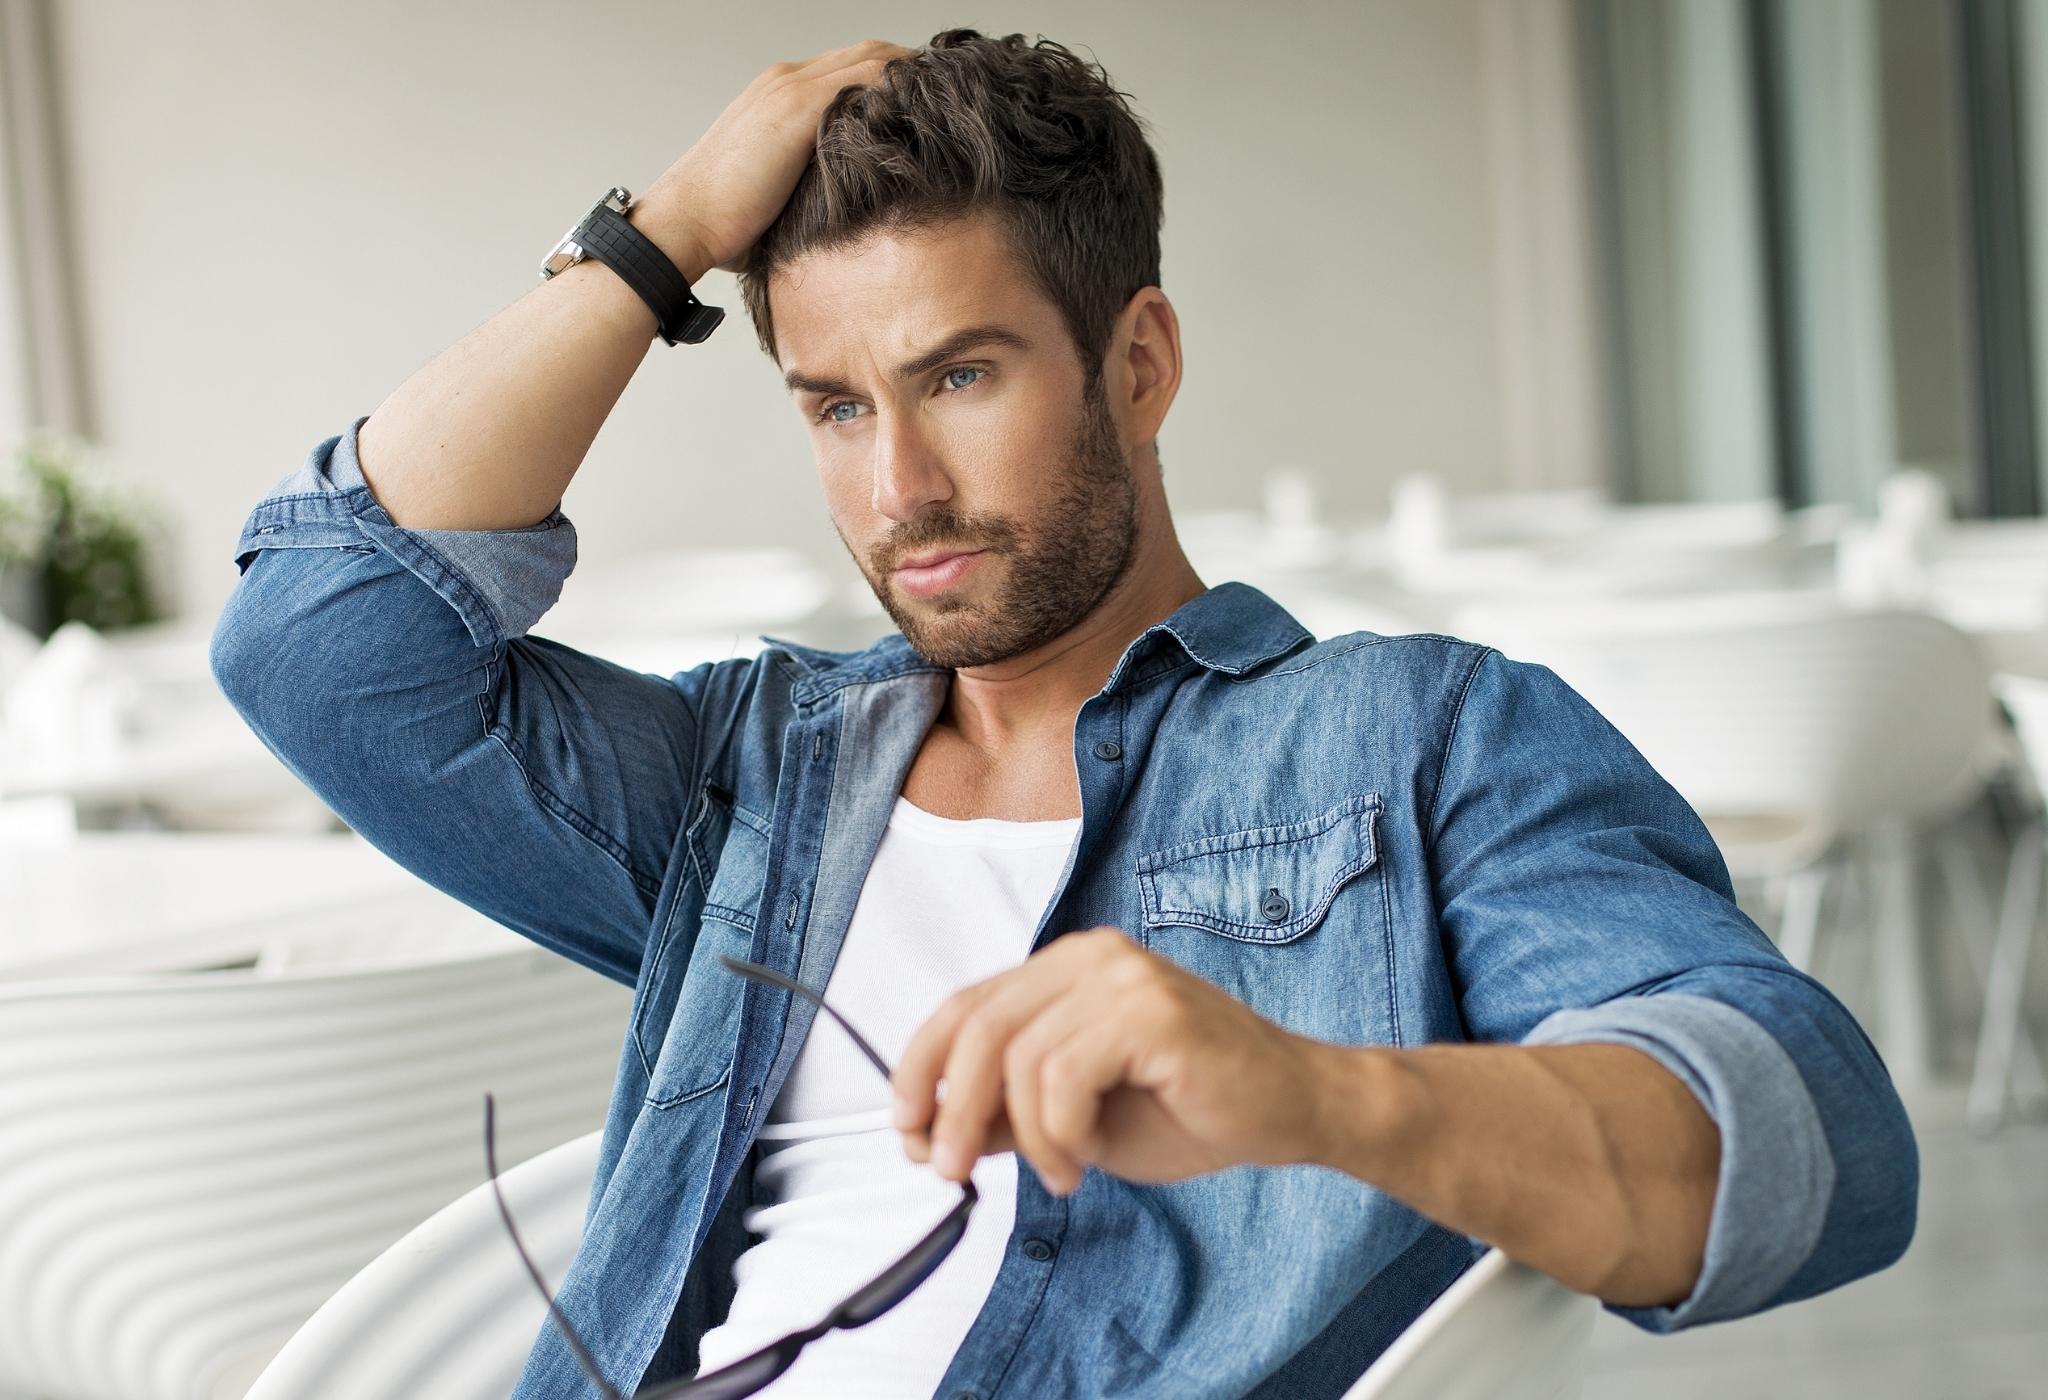 men's hair types - hair dye can help a man know how to look young